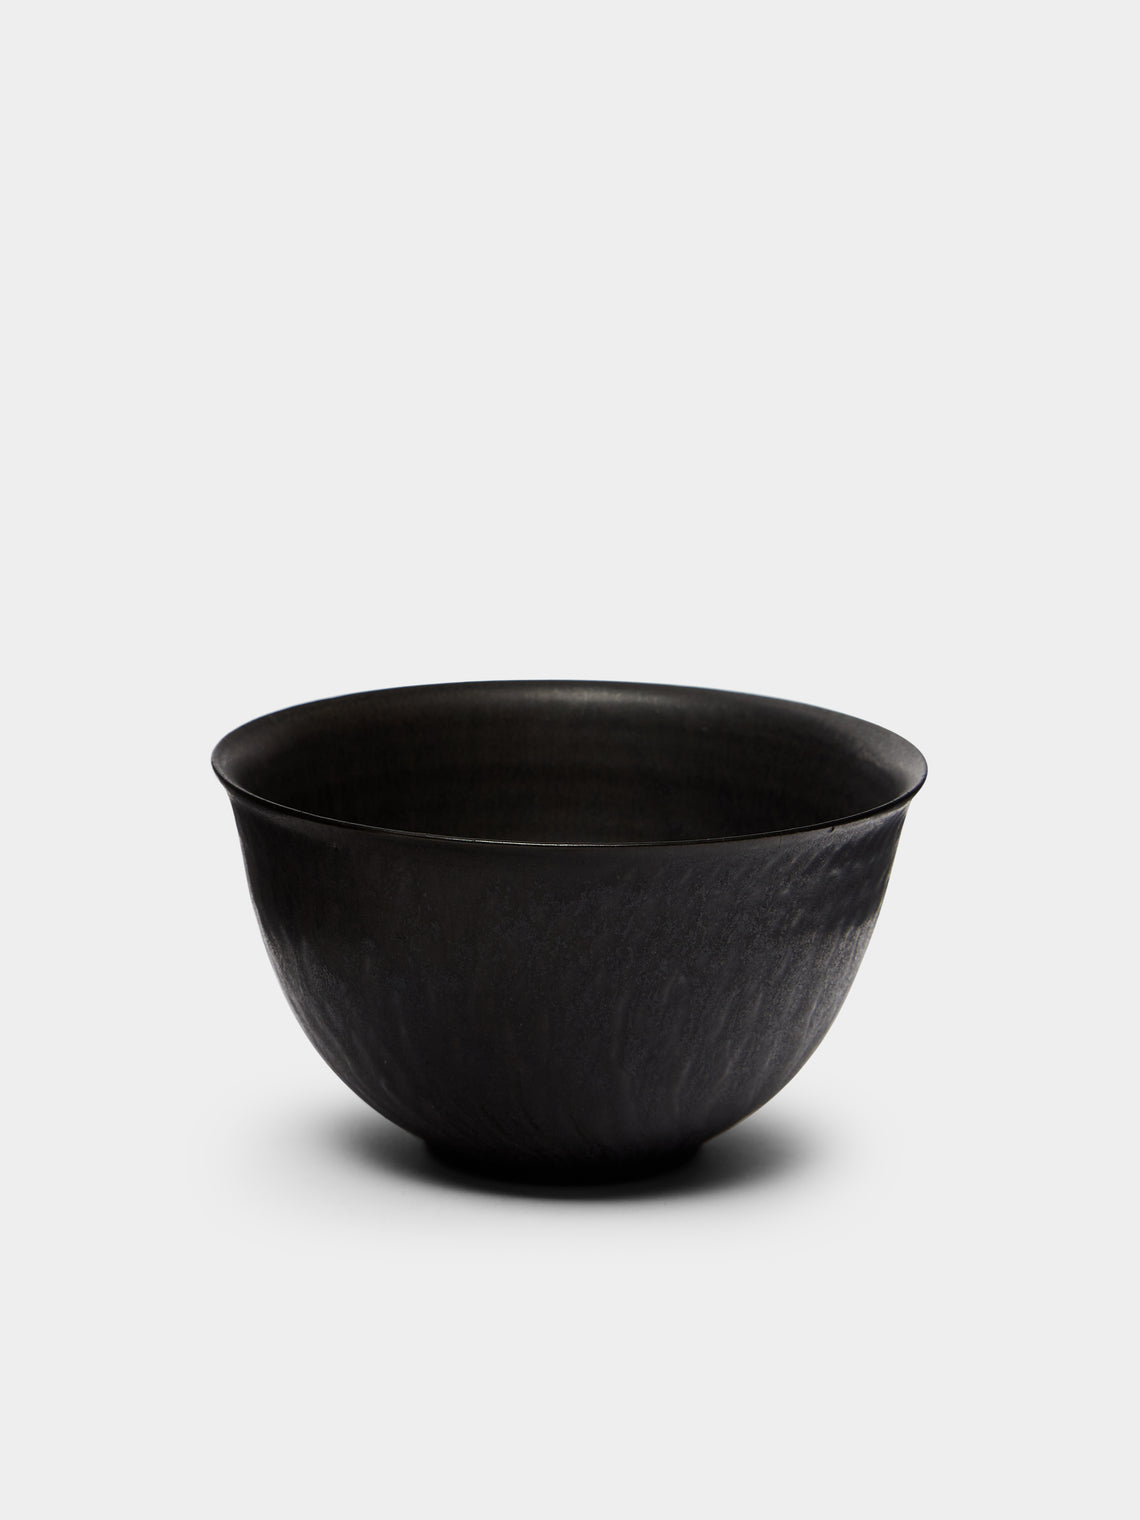 Lee Song-am - Black Clay Deep Bowls (Set of 2) -  - ABASK - 